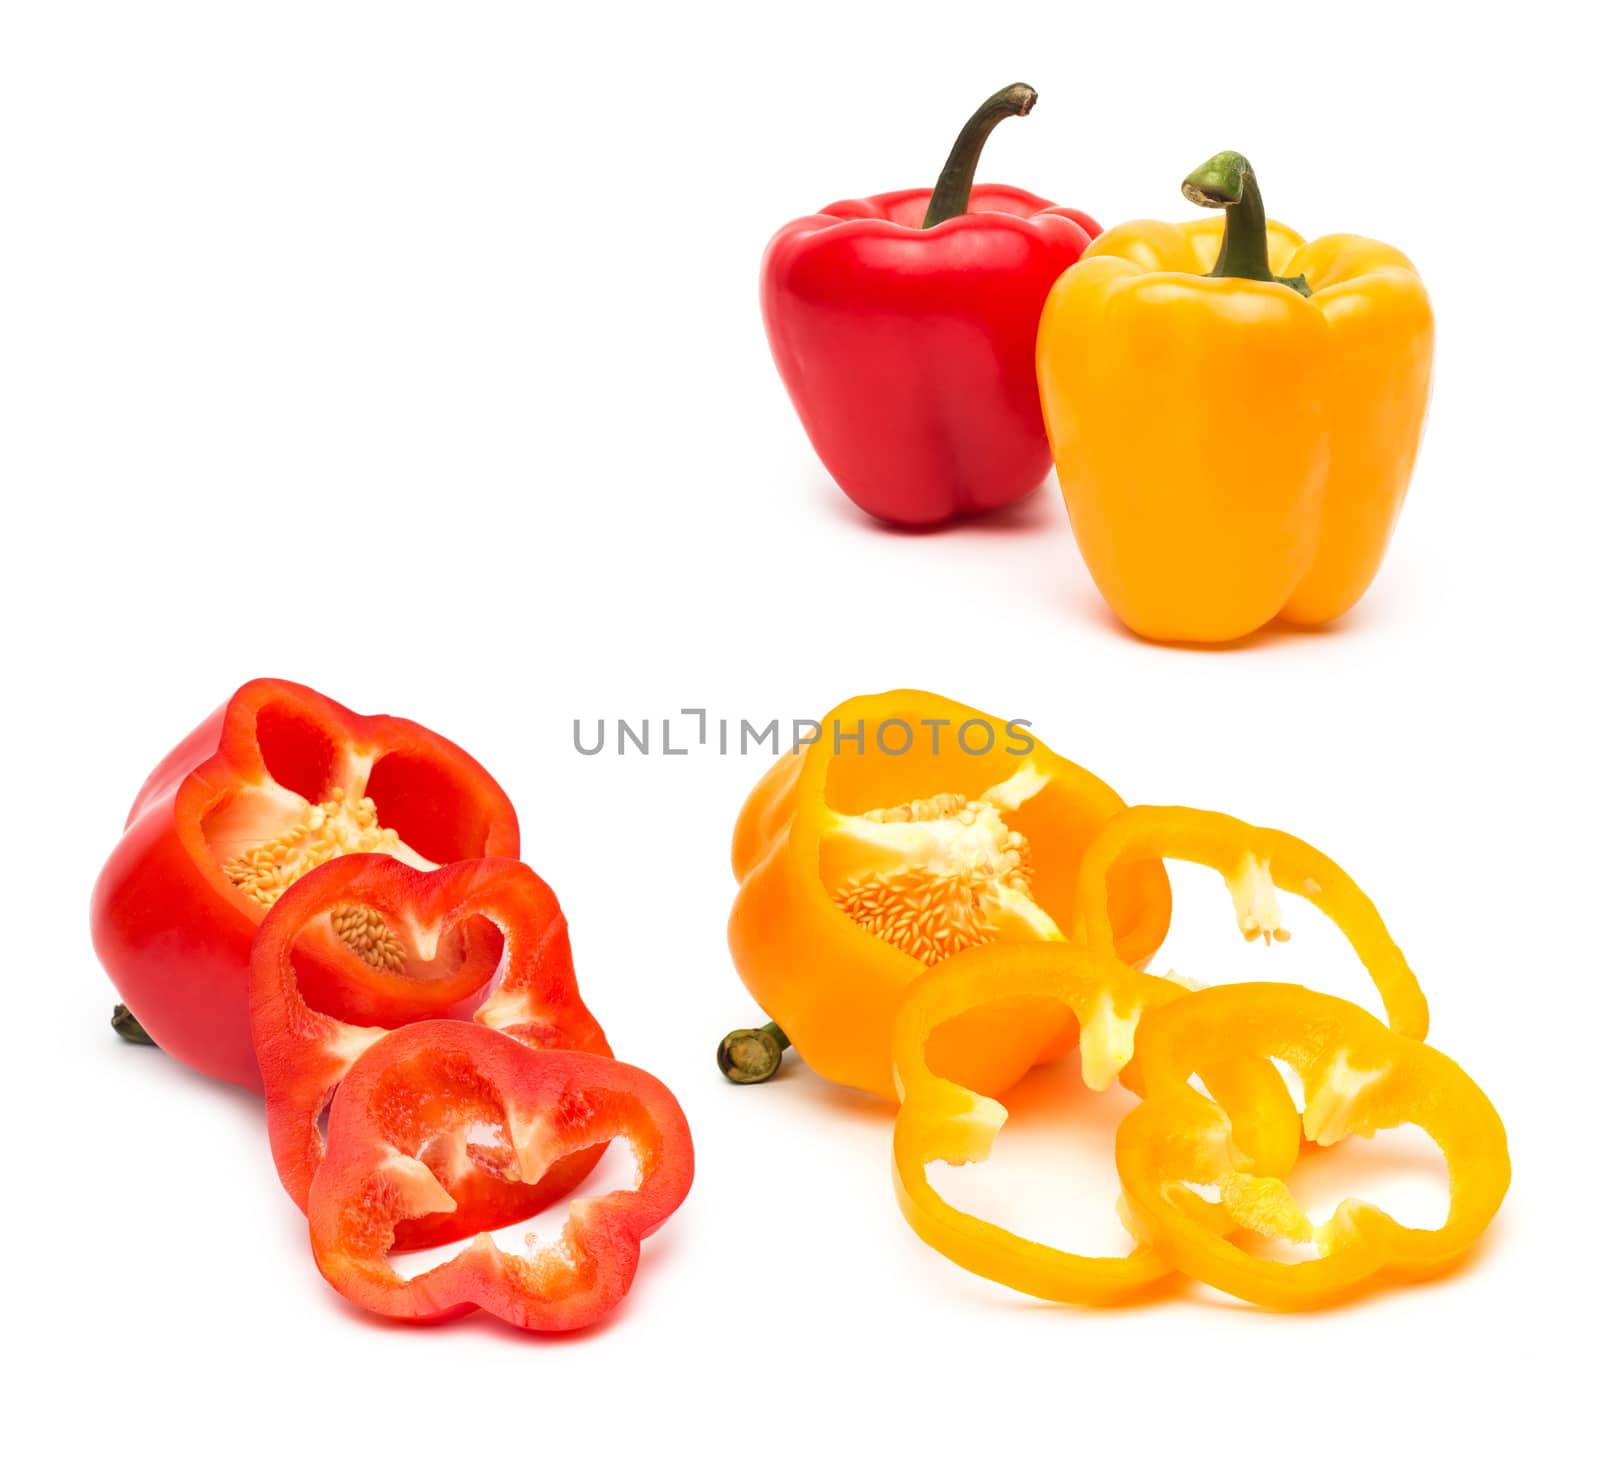 red and yellow peppers isolated on white background